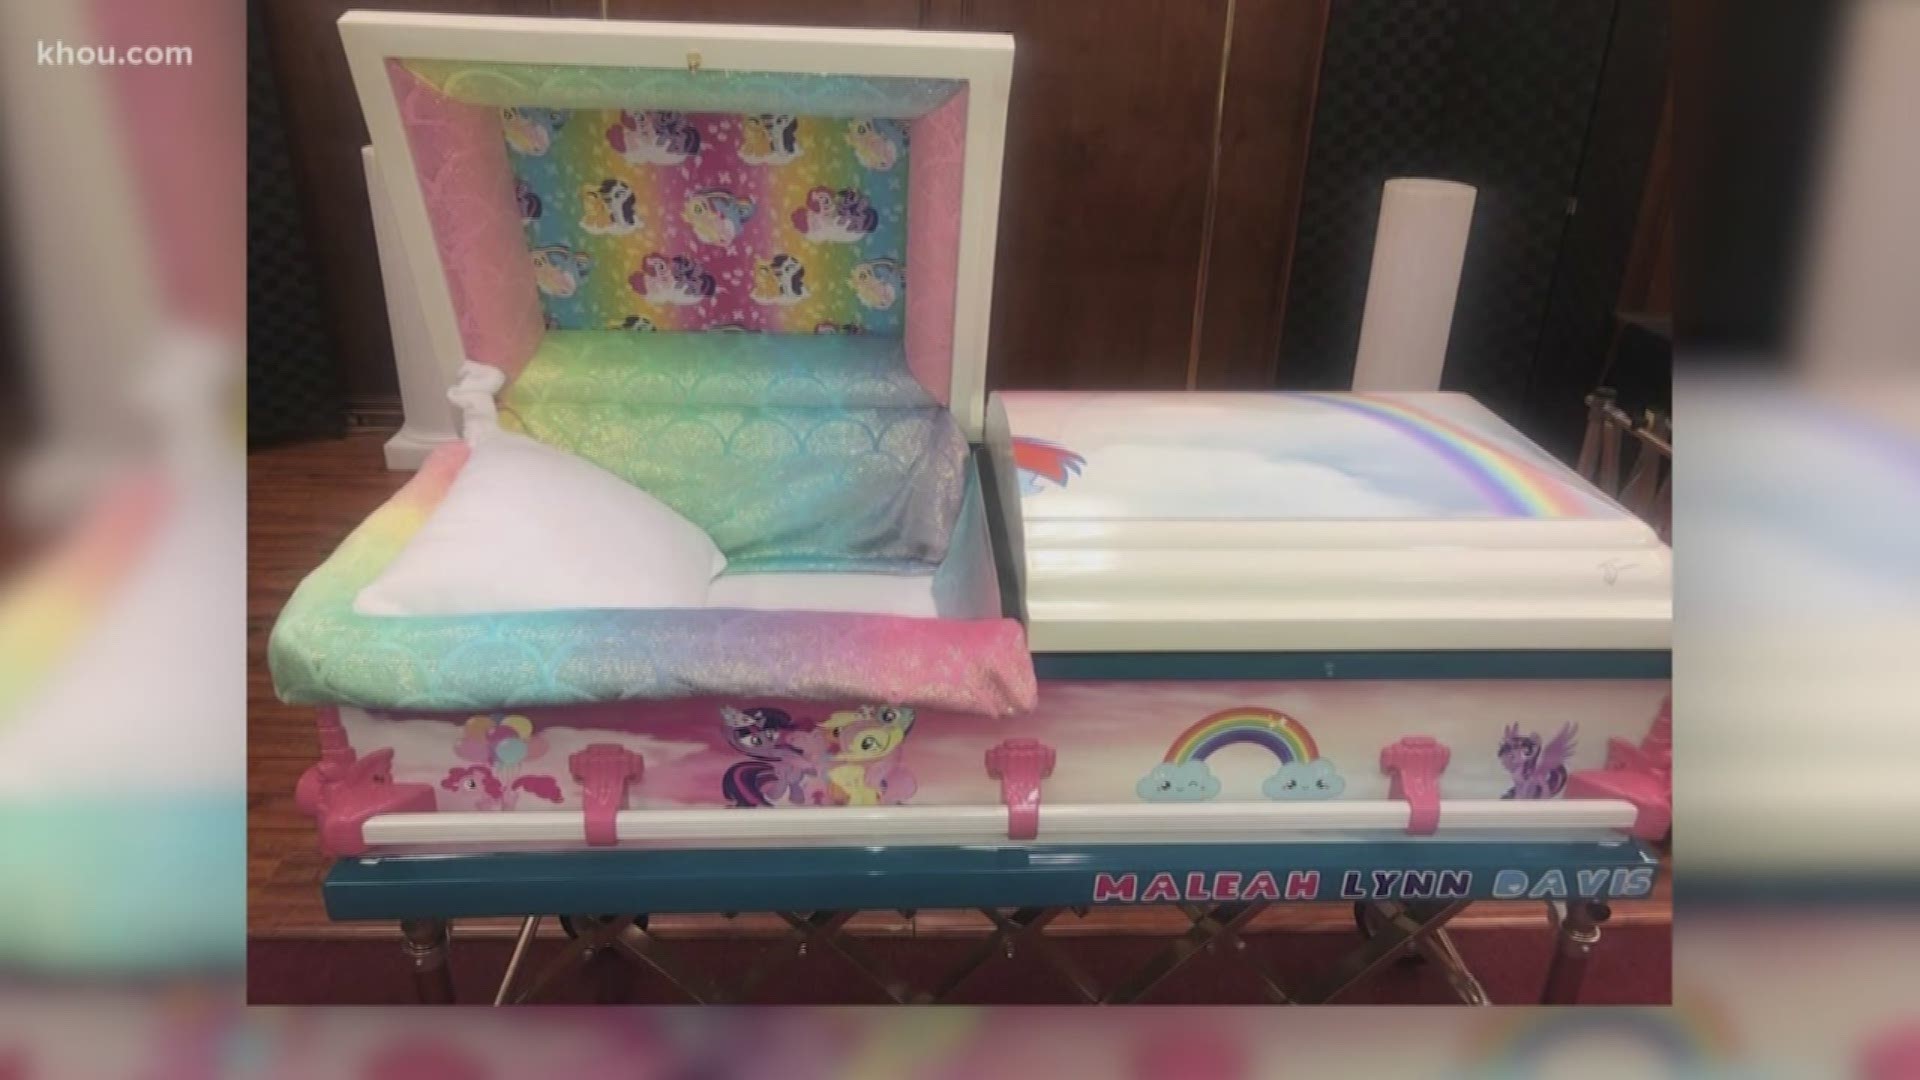 Ninety miles south of where the world last saw a glimpse of Maleah Davis, strangers in the town of Edna decided to help Maleah rest in peace. SoulShine Industries designed a tiny casket with everything Maleah loved.